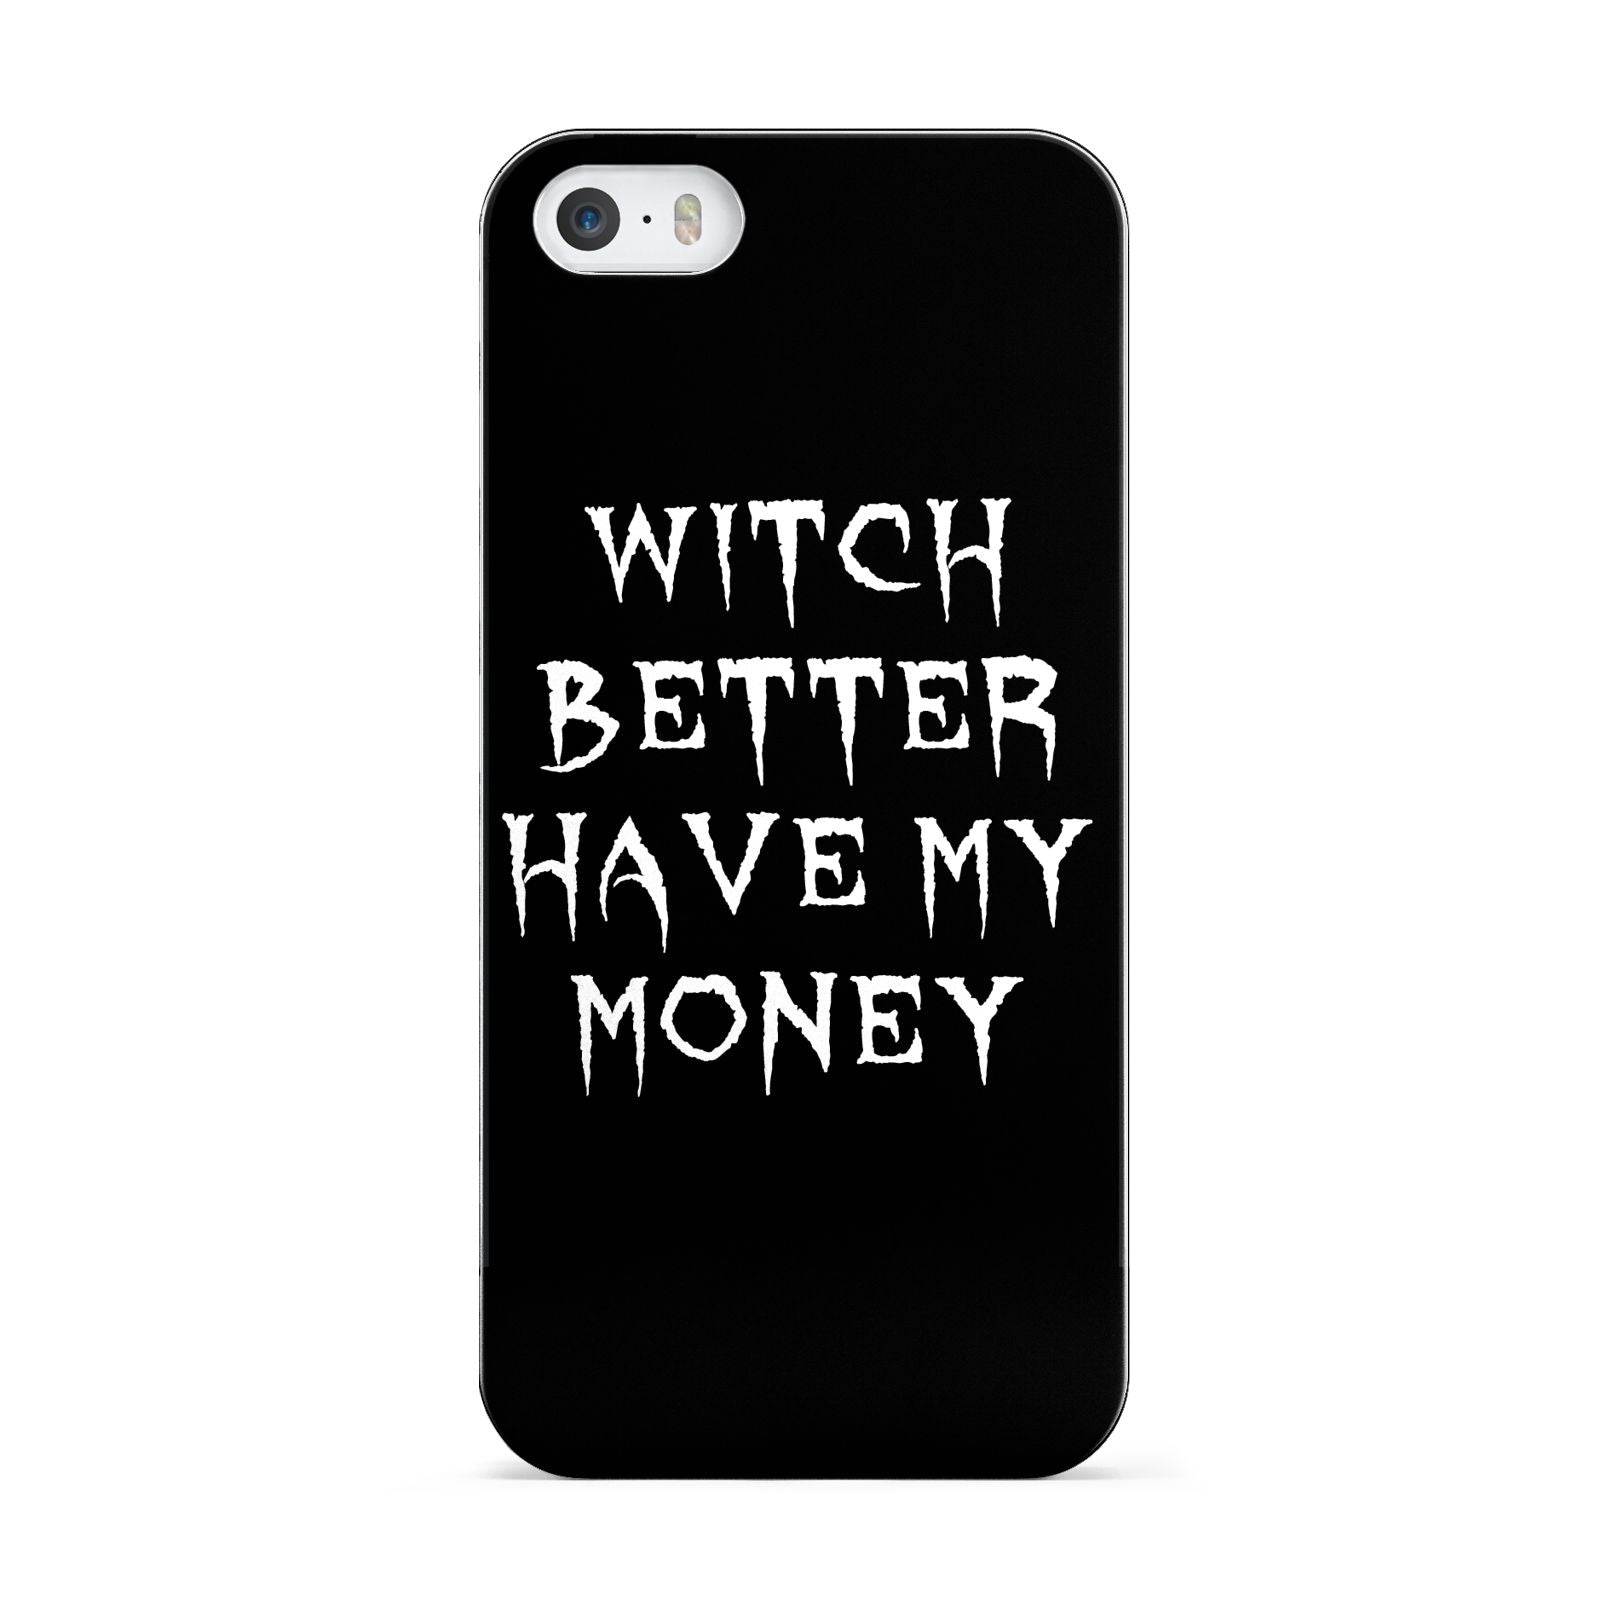 Witch Better Have My Money Apple iPhone 5 Case